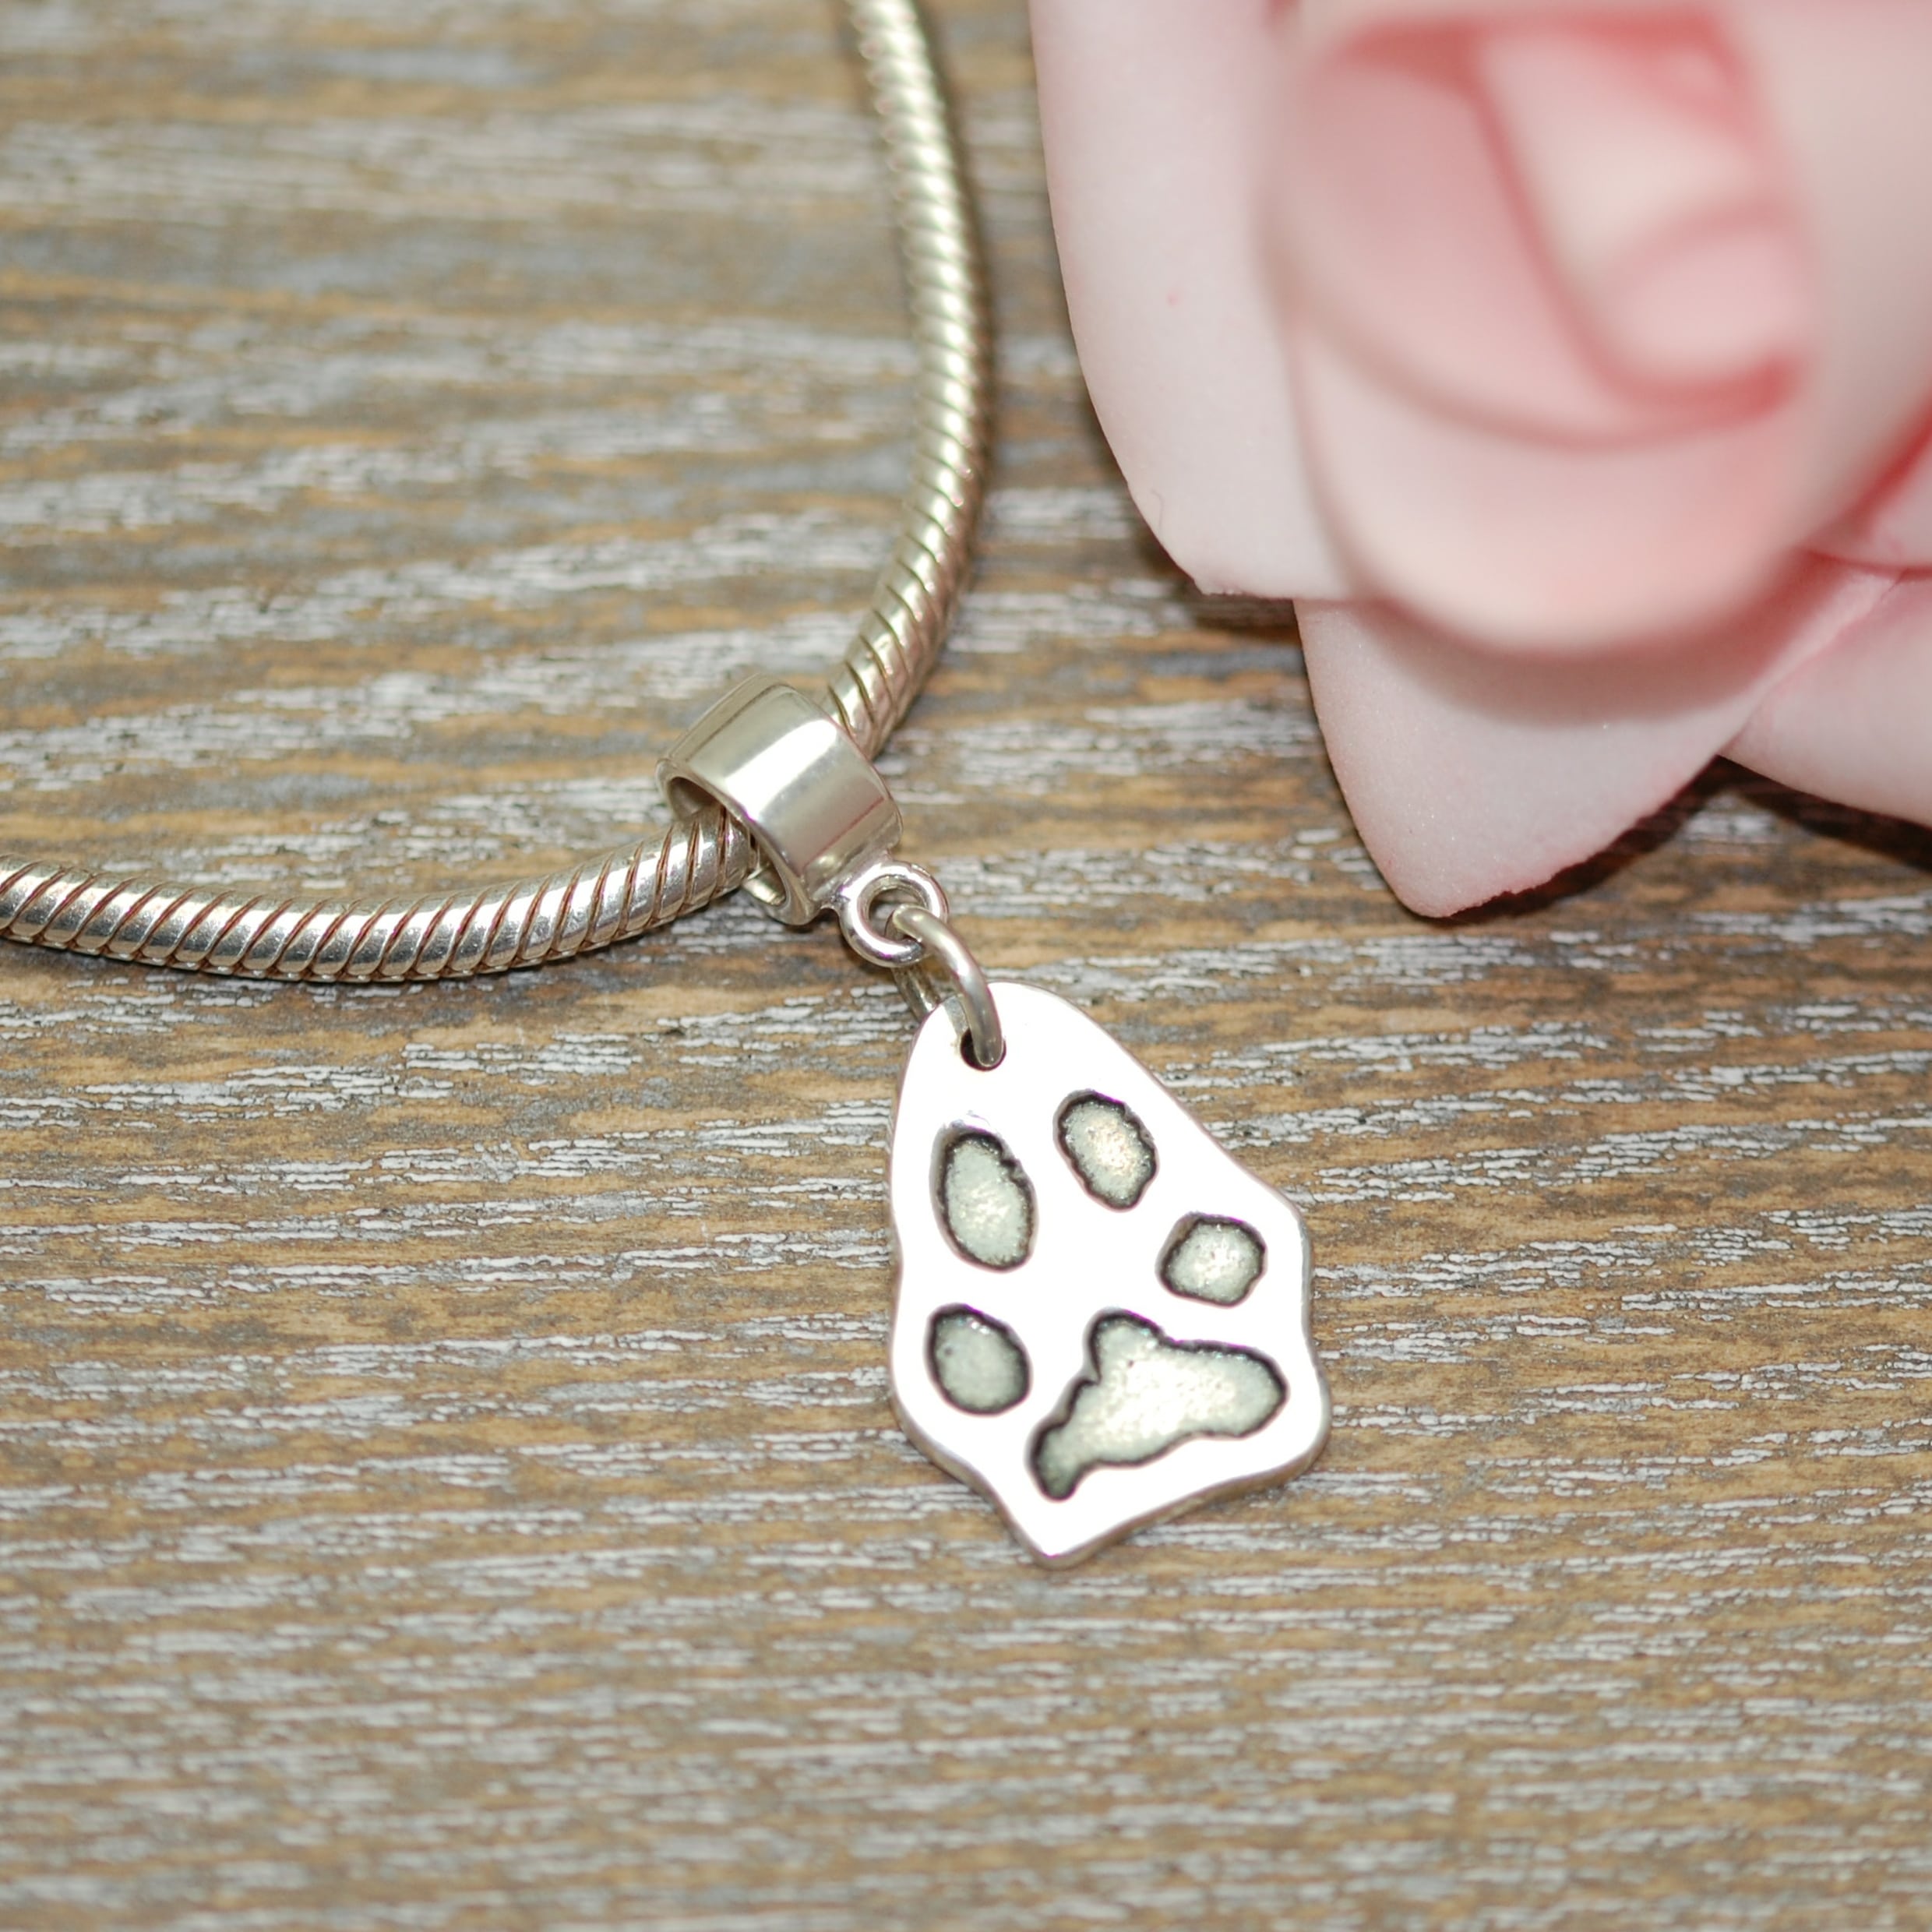 Regular silver paw print charm with charm carrier